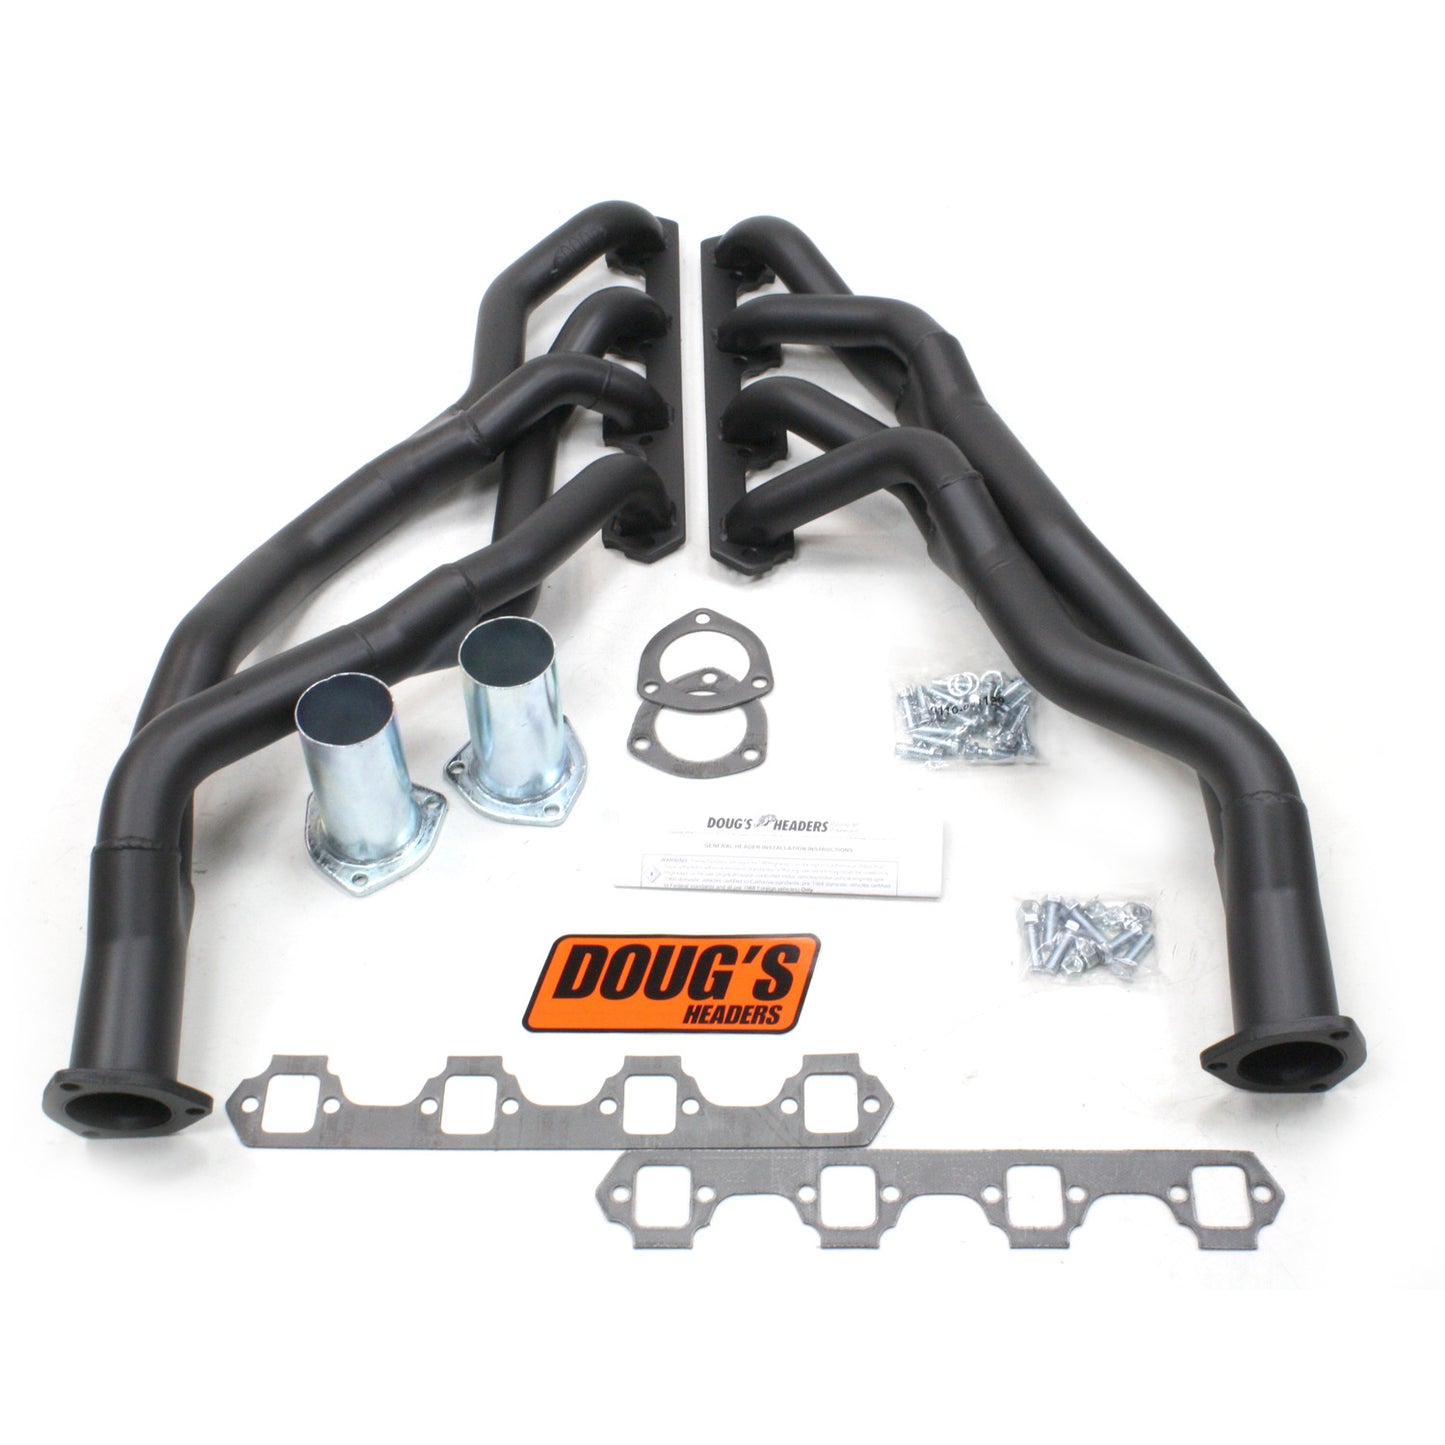 Doug's Headers D661Y-B 1 5/8" Tri-Y Header Ford 64 1/2-70 Mustang, 67-68 Cougar, 62-65 Ranchero, 60-65 Falcon and Comet Small Block Ford with TCI and similar Mustang II front suspension rack conversions Hi-Temp Black Coating